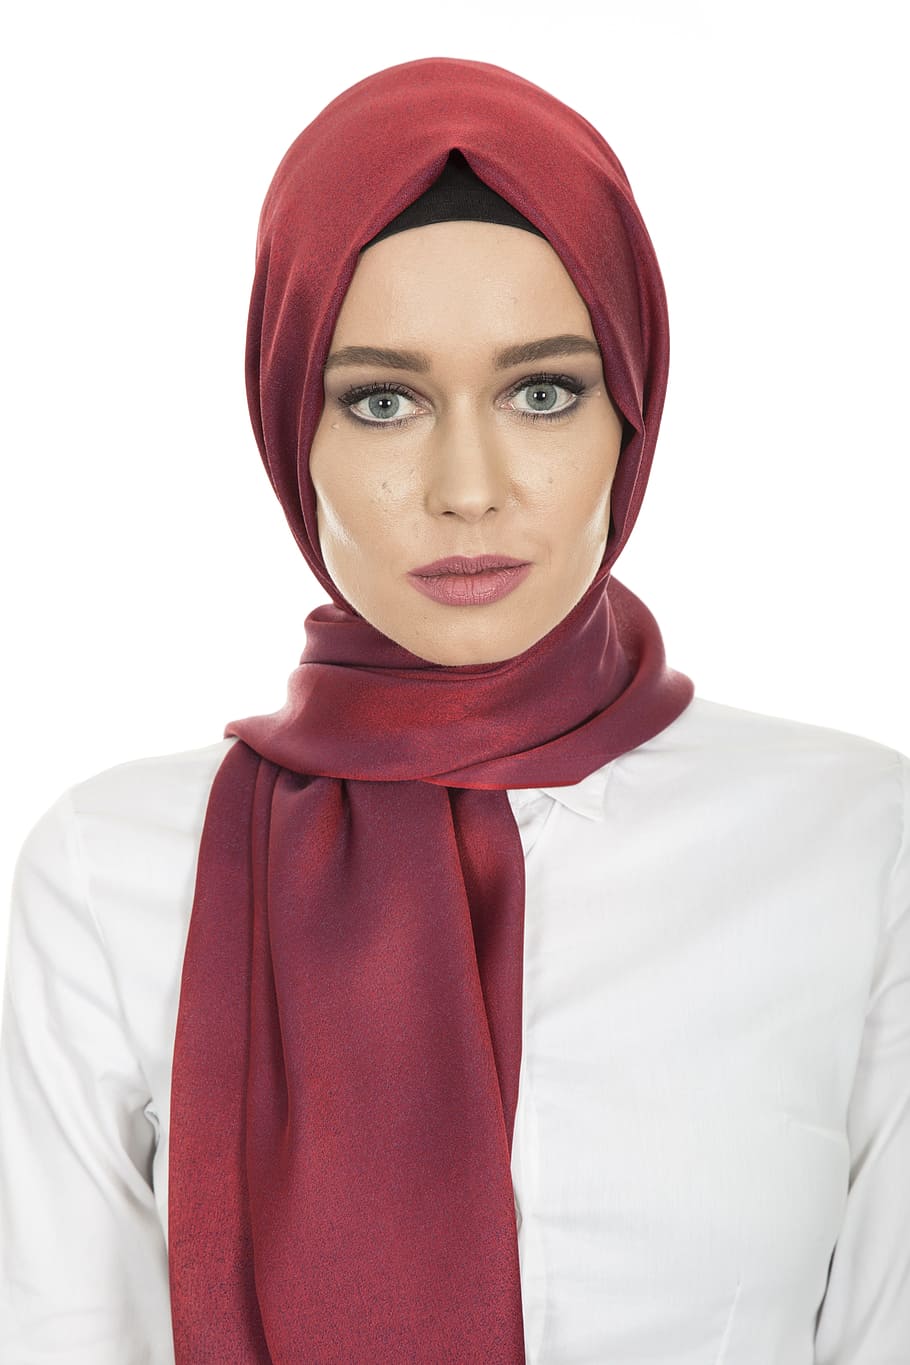 woman in white top and red headscarf, hijab, head cover, hair